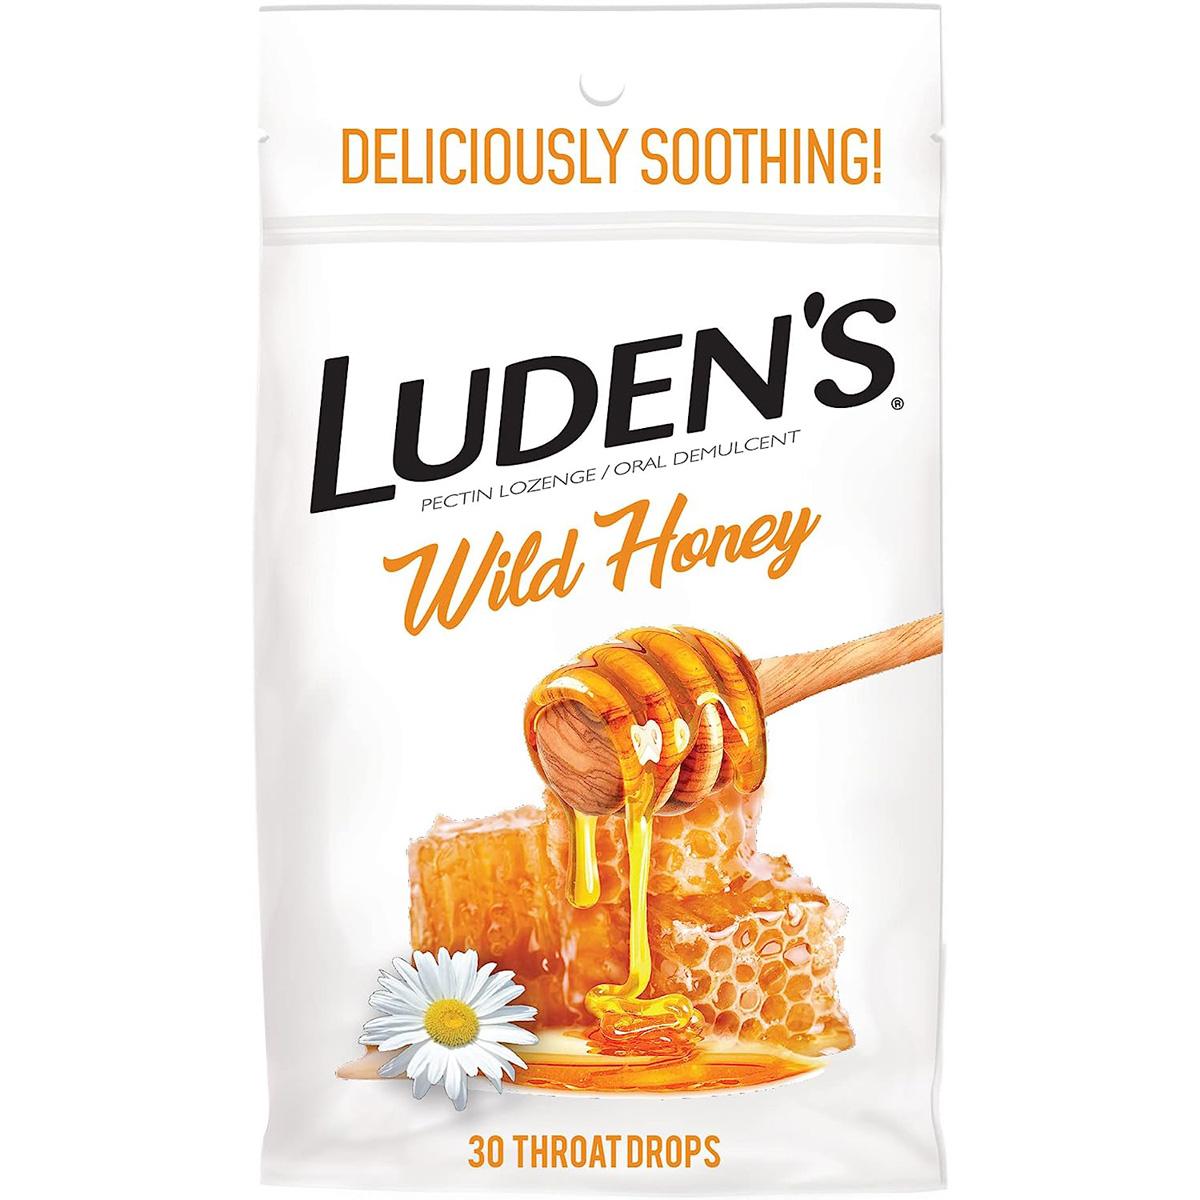 Ludens Soothing Throat Drops Wild Honey or Licorice for $1.36